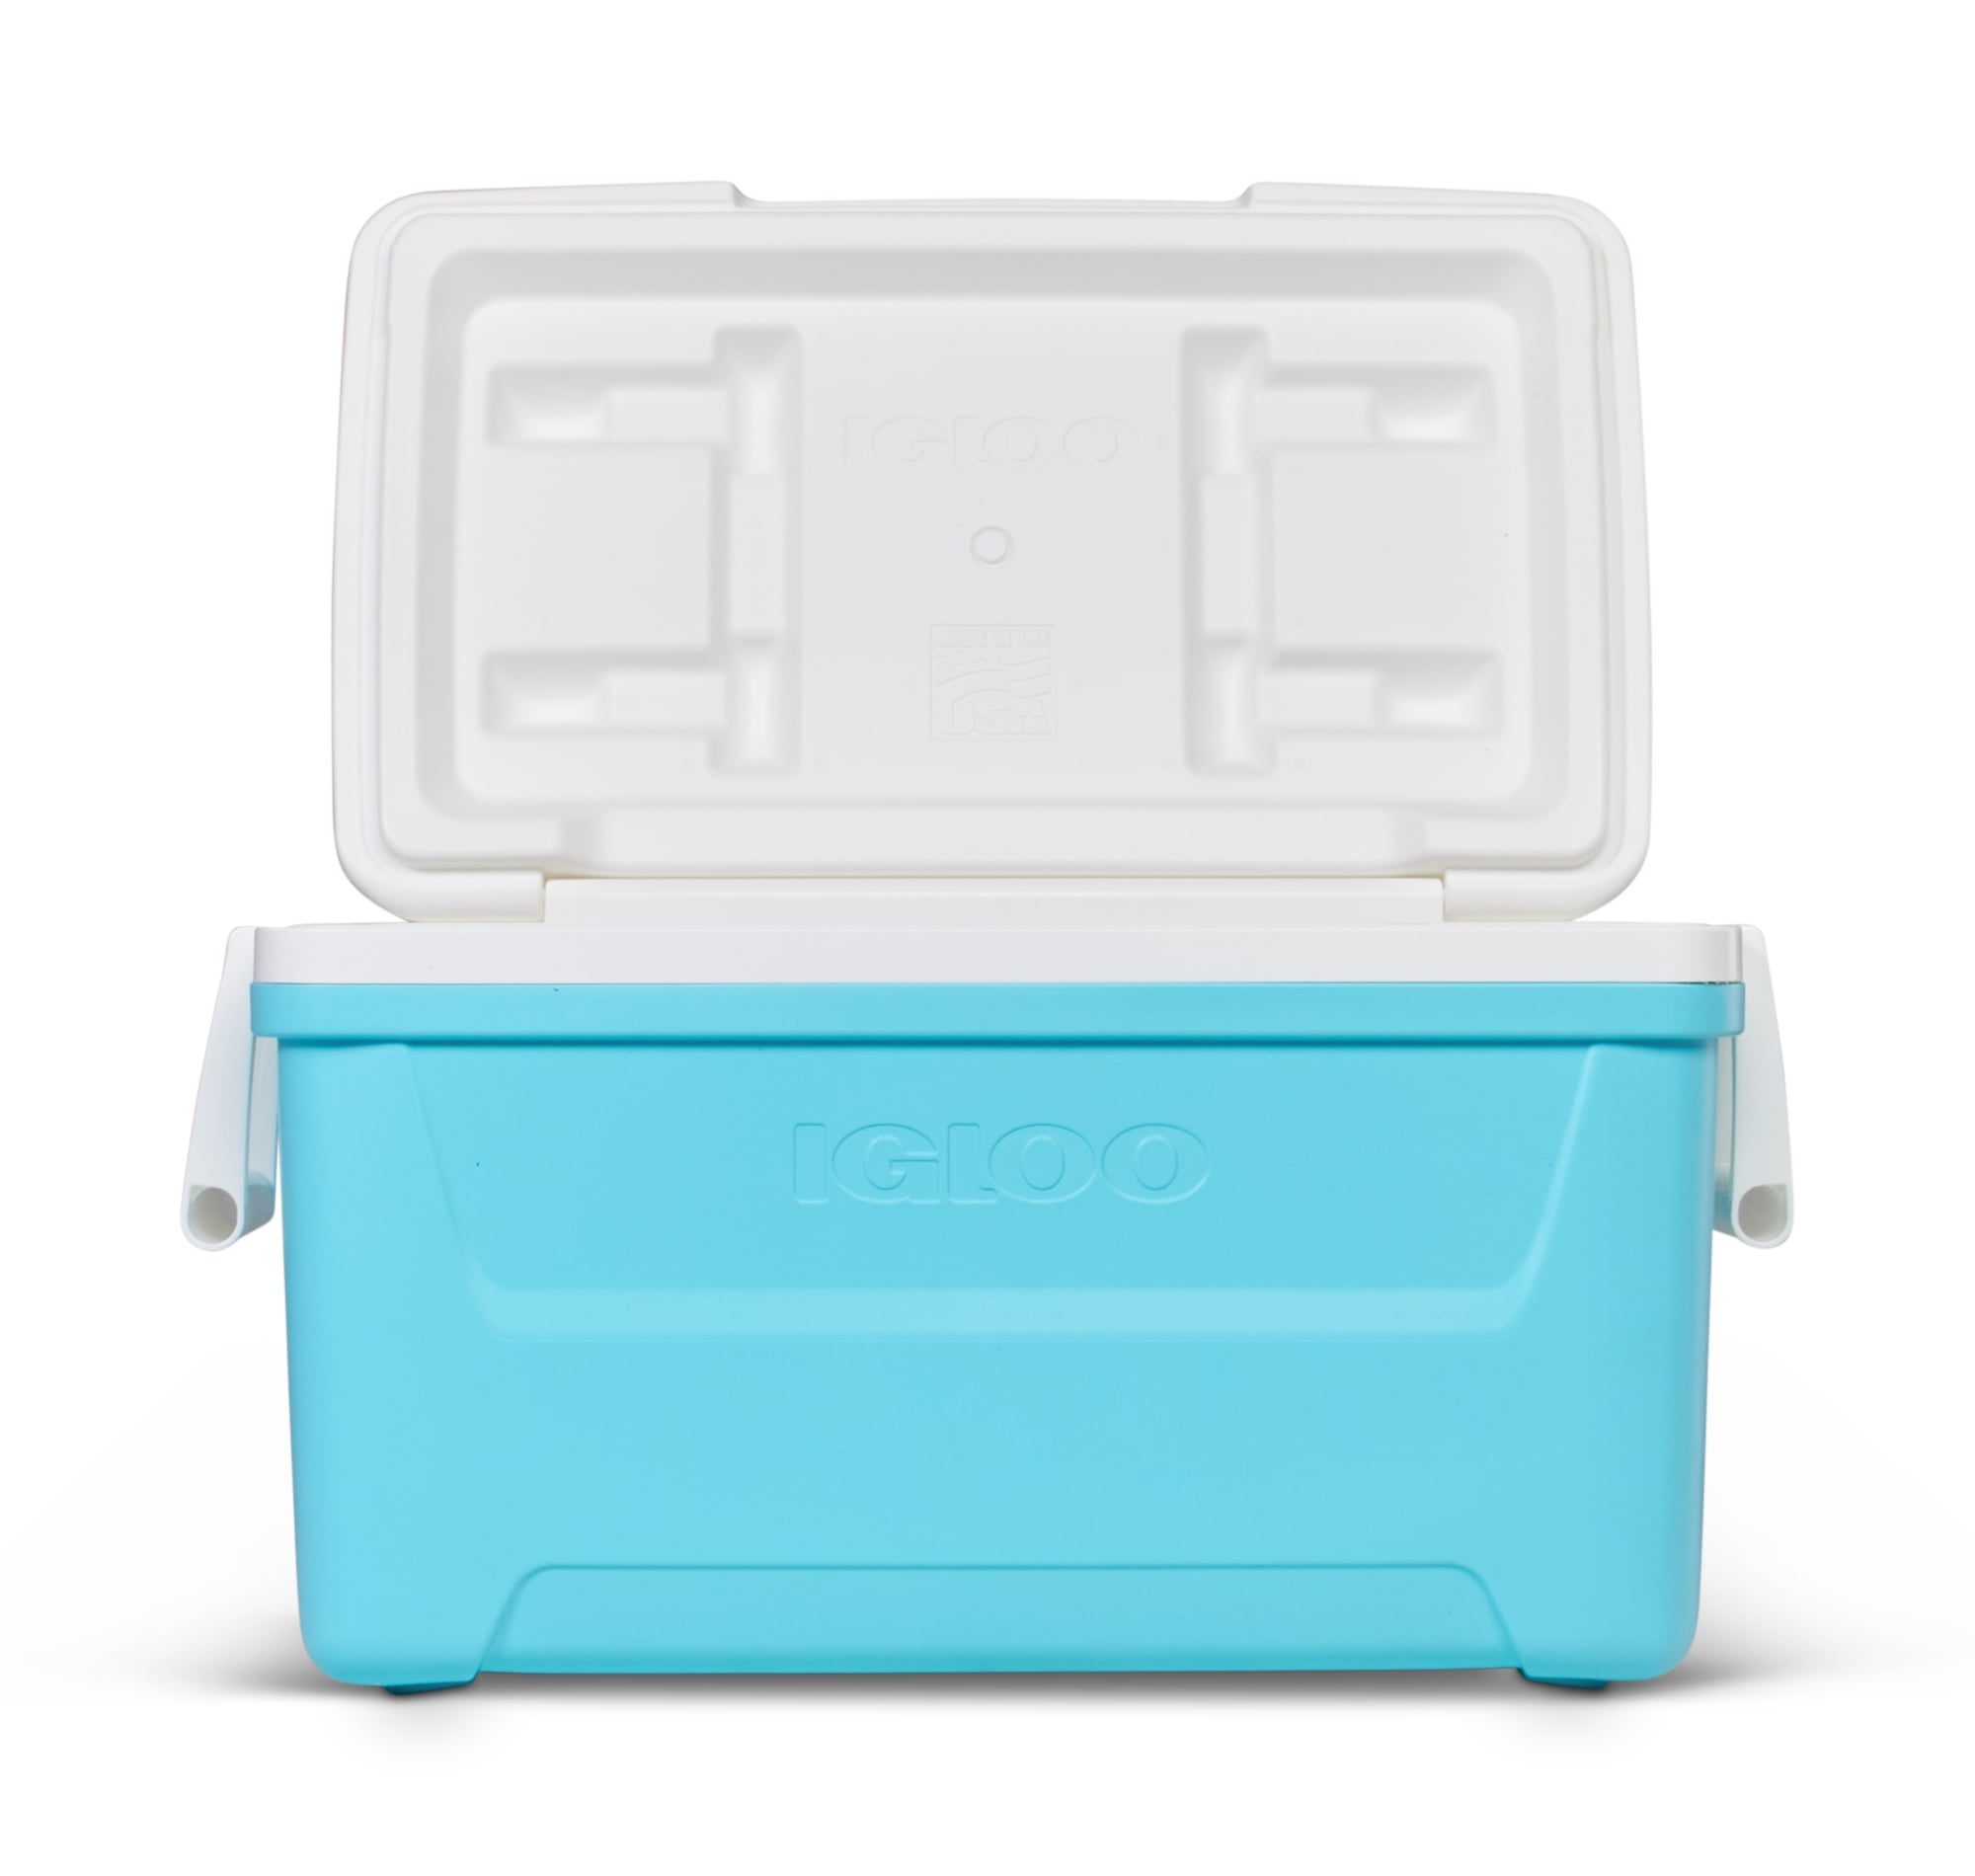 Easy clean Igloo Marine Ultra 48 quart Cooler Durable keeps ice up to 3 days 